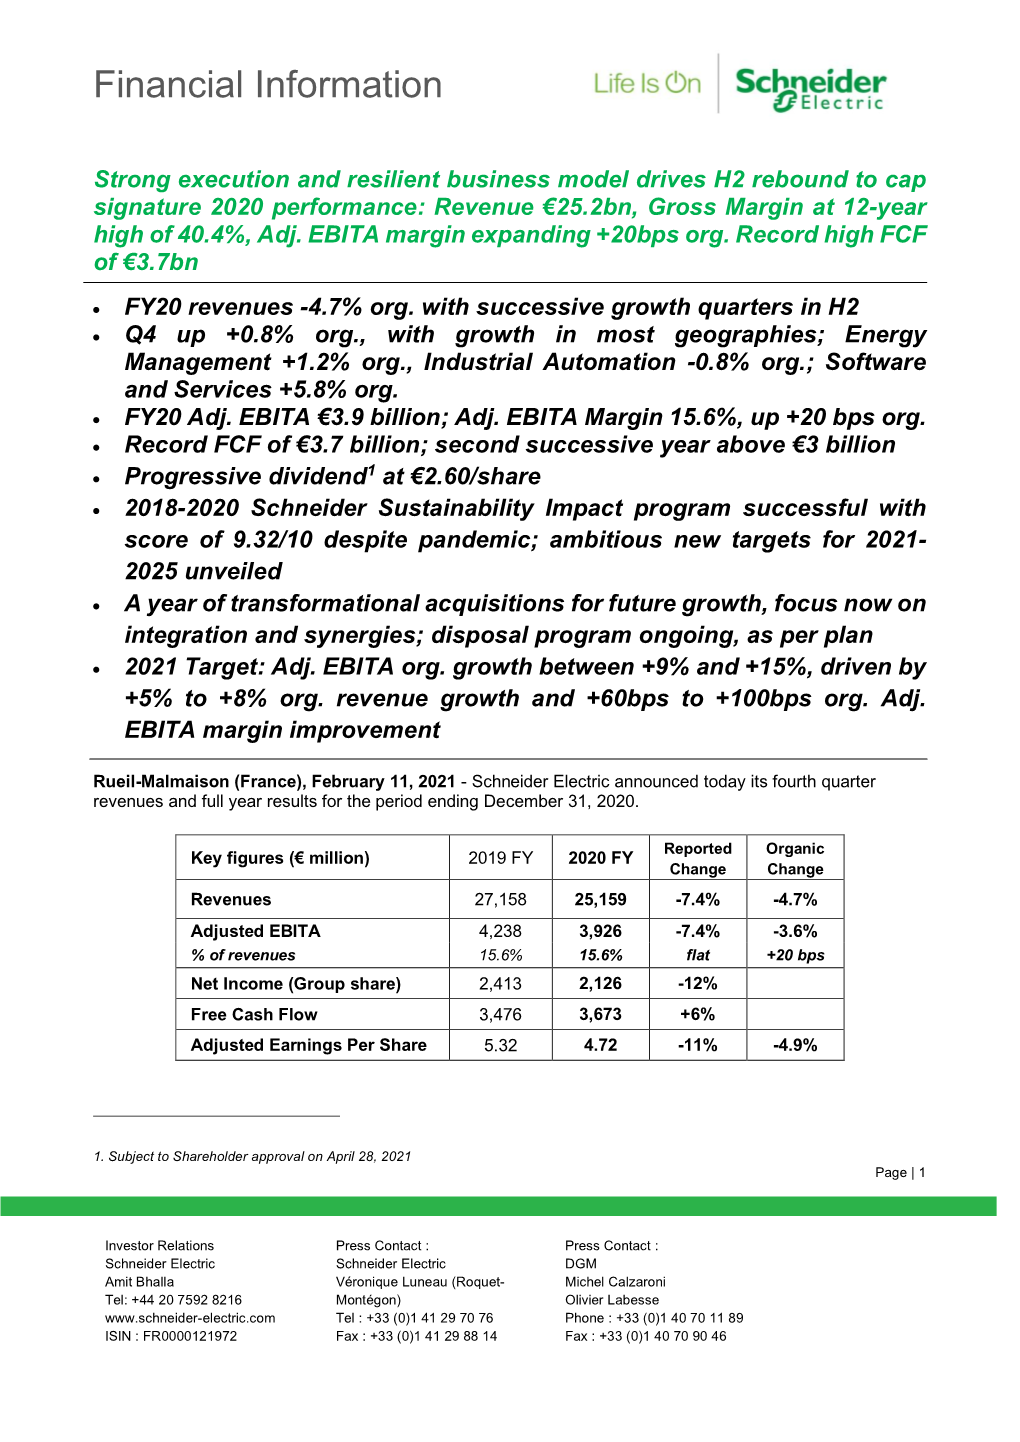 2020 Full-Year Financial Results